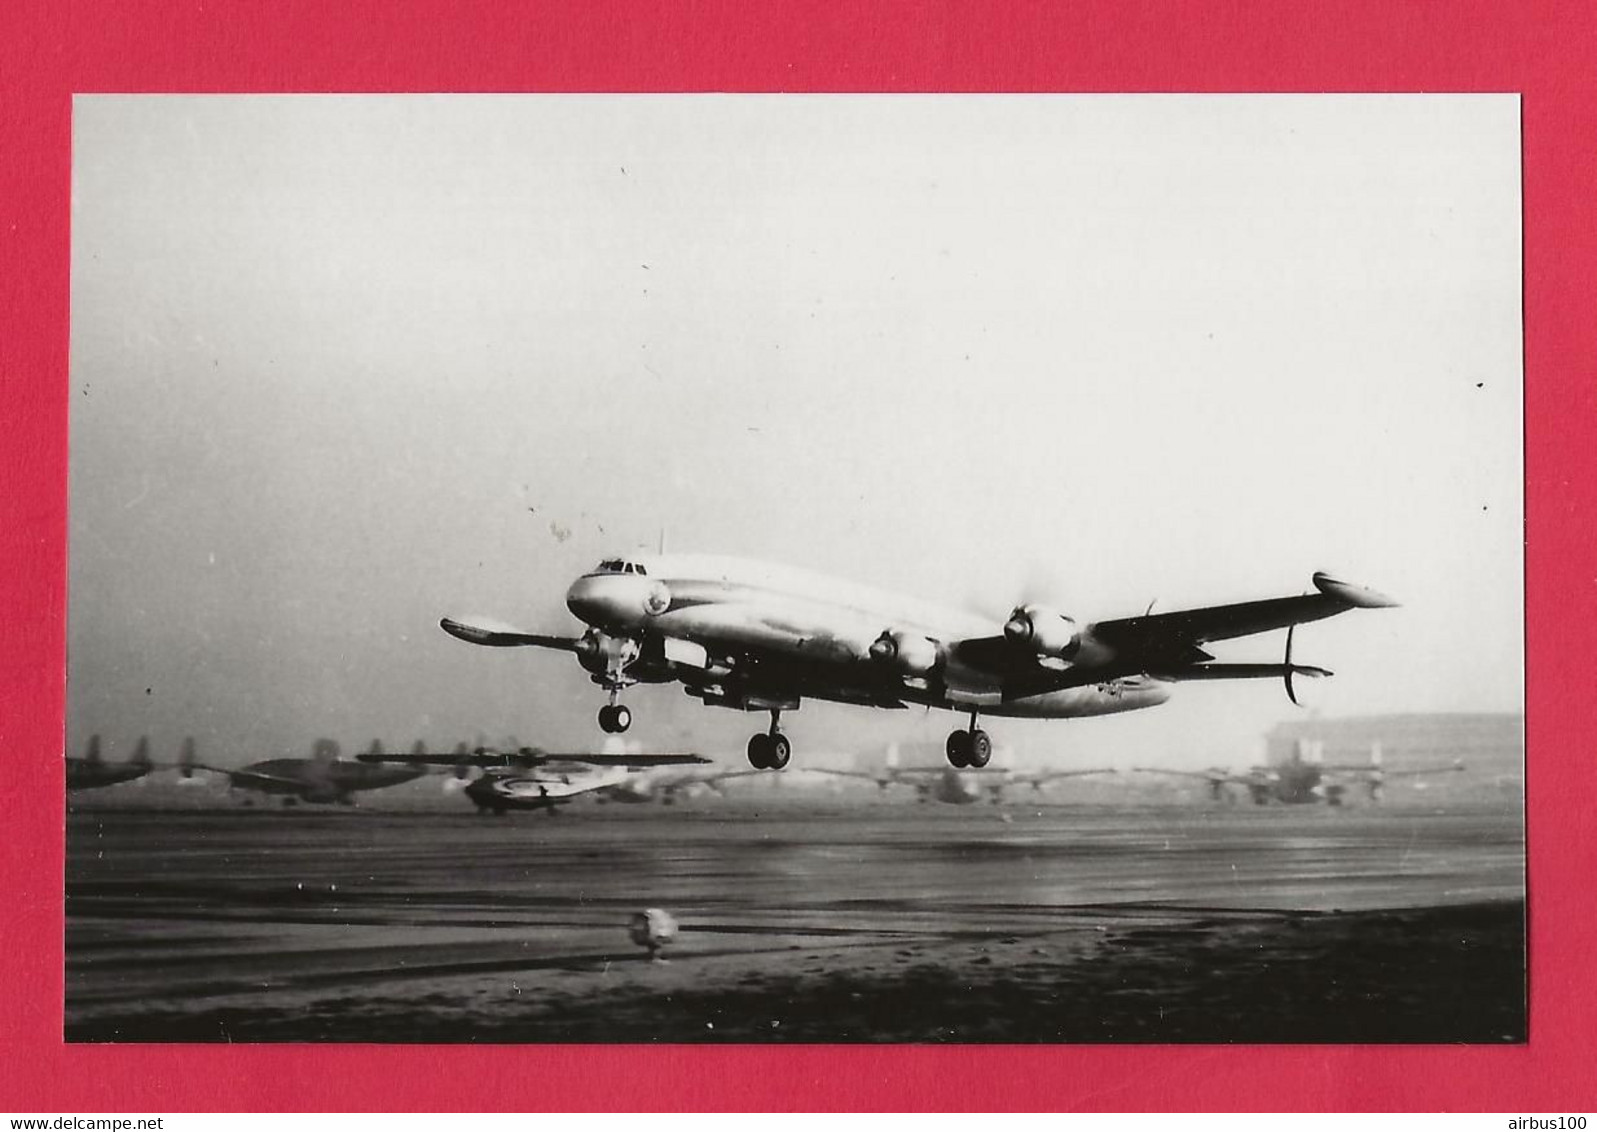 BELLE PHOTO REPRODUCTION AVION PLANE - COMPAGNIE LOCKHEED CONSTELLATION A L'ATTERRISSAGE - Luchtvaart